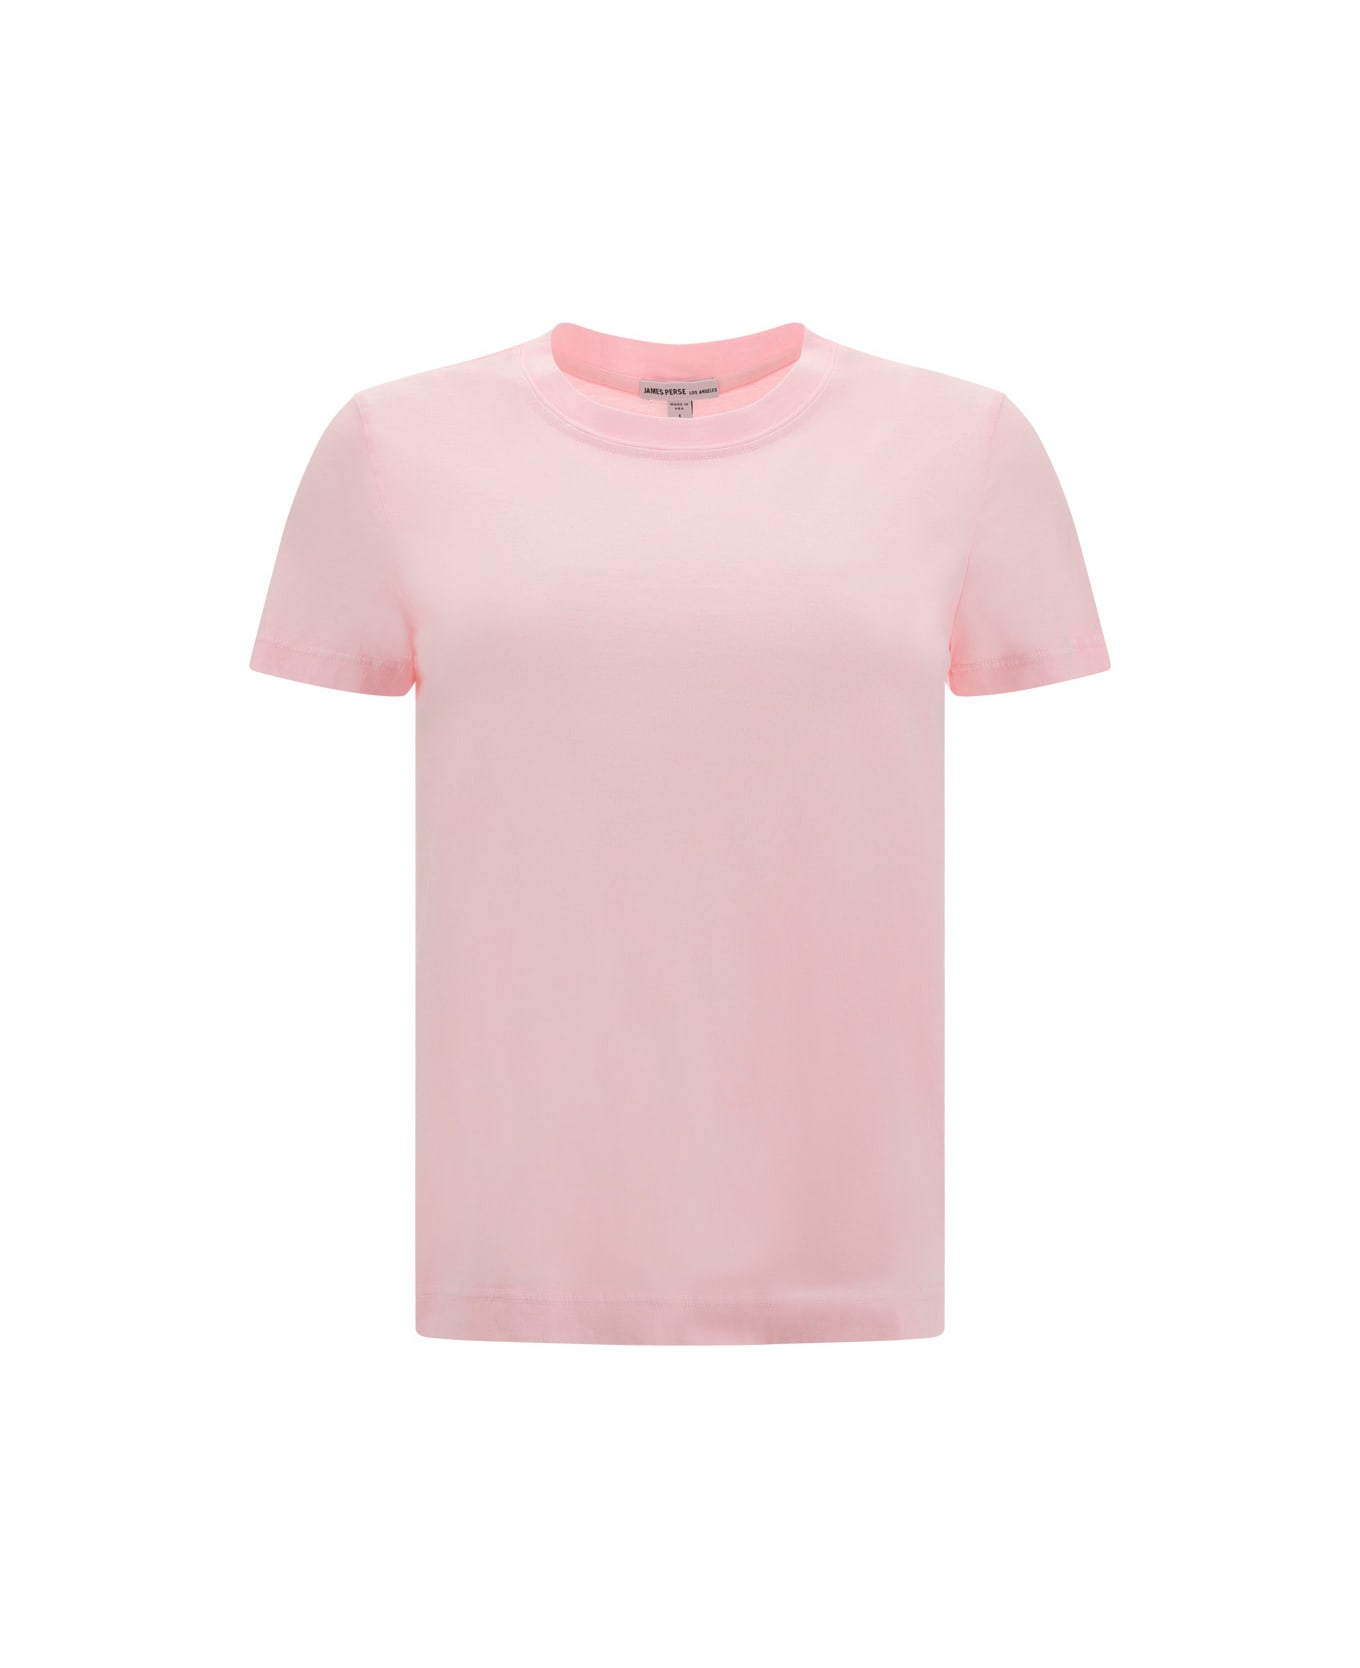 James Perse T-shirt - Oxford Pink Pigment